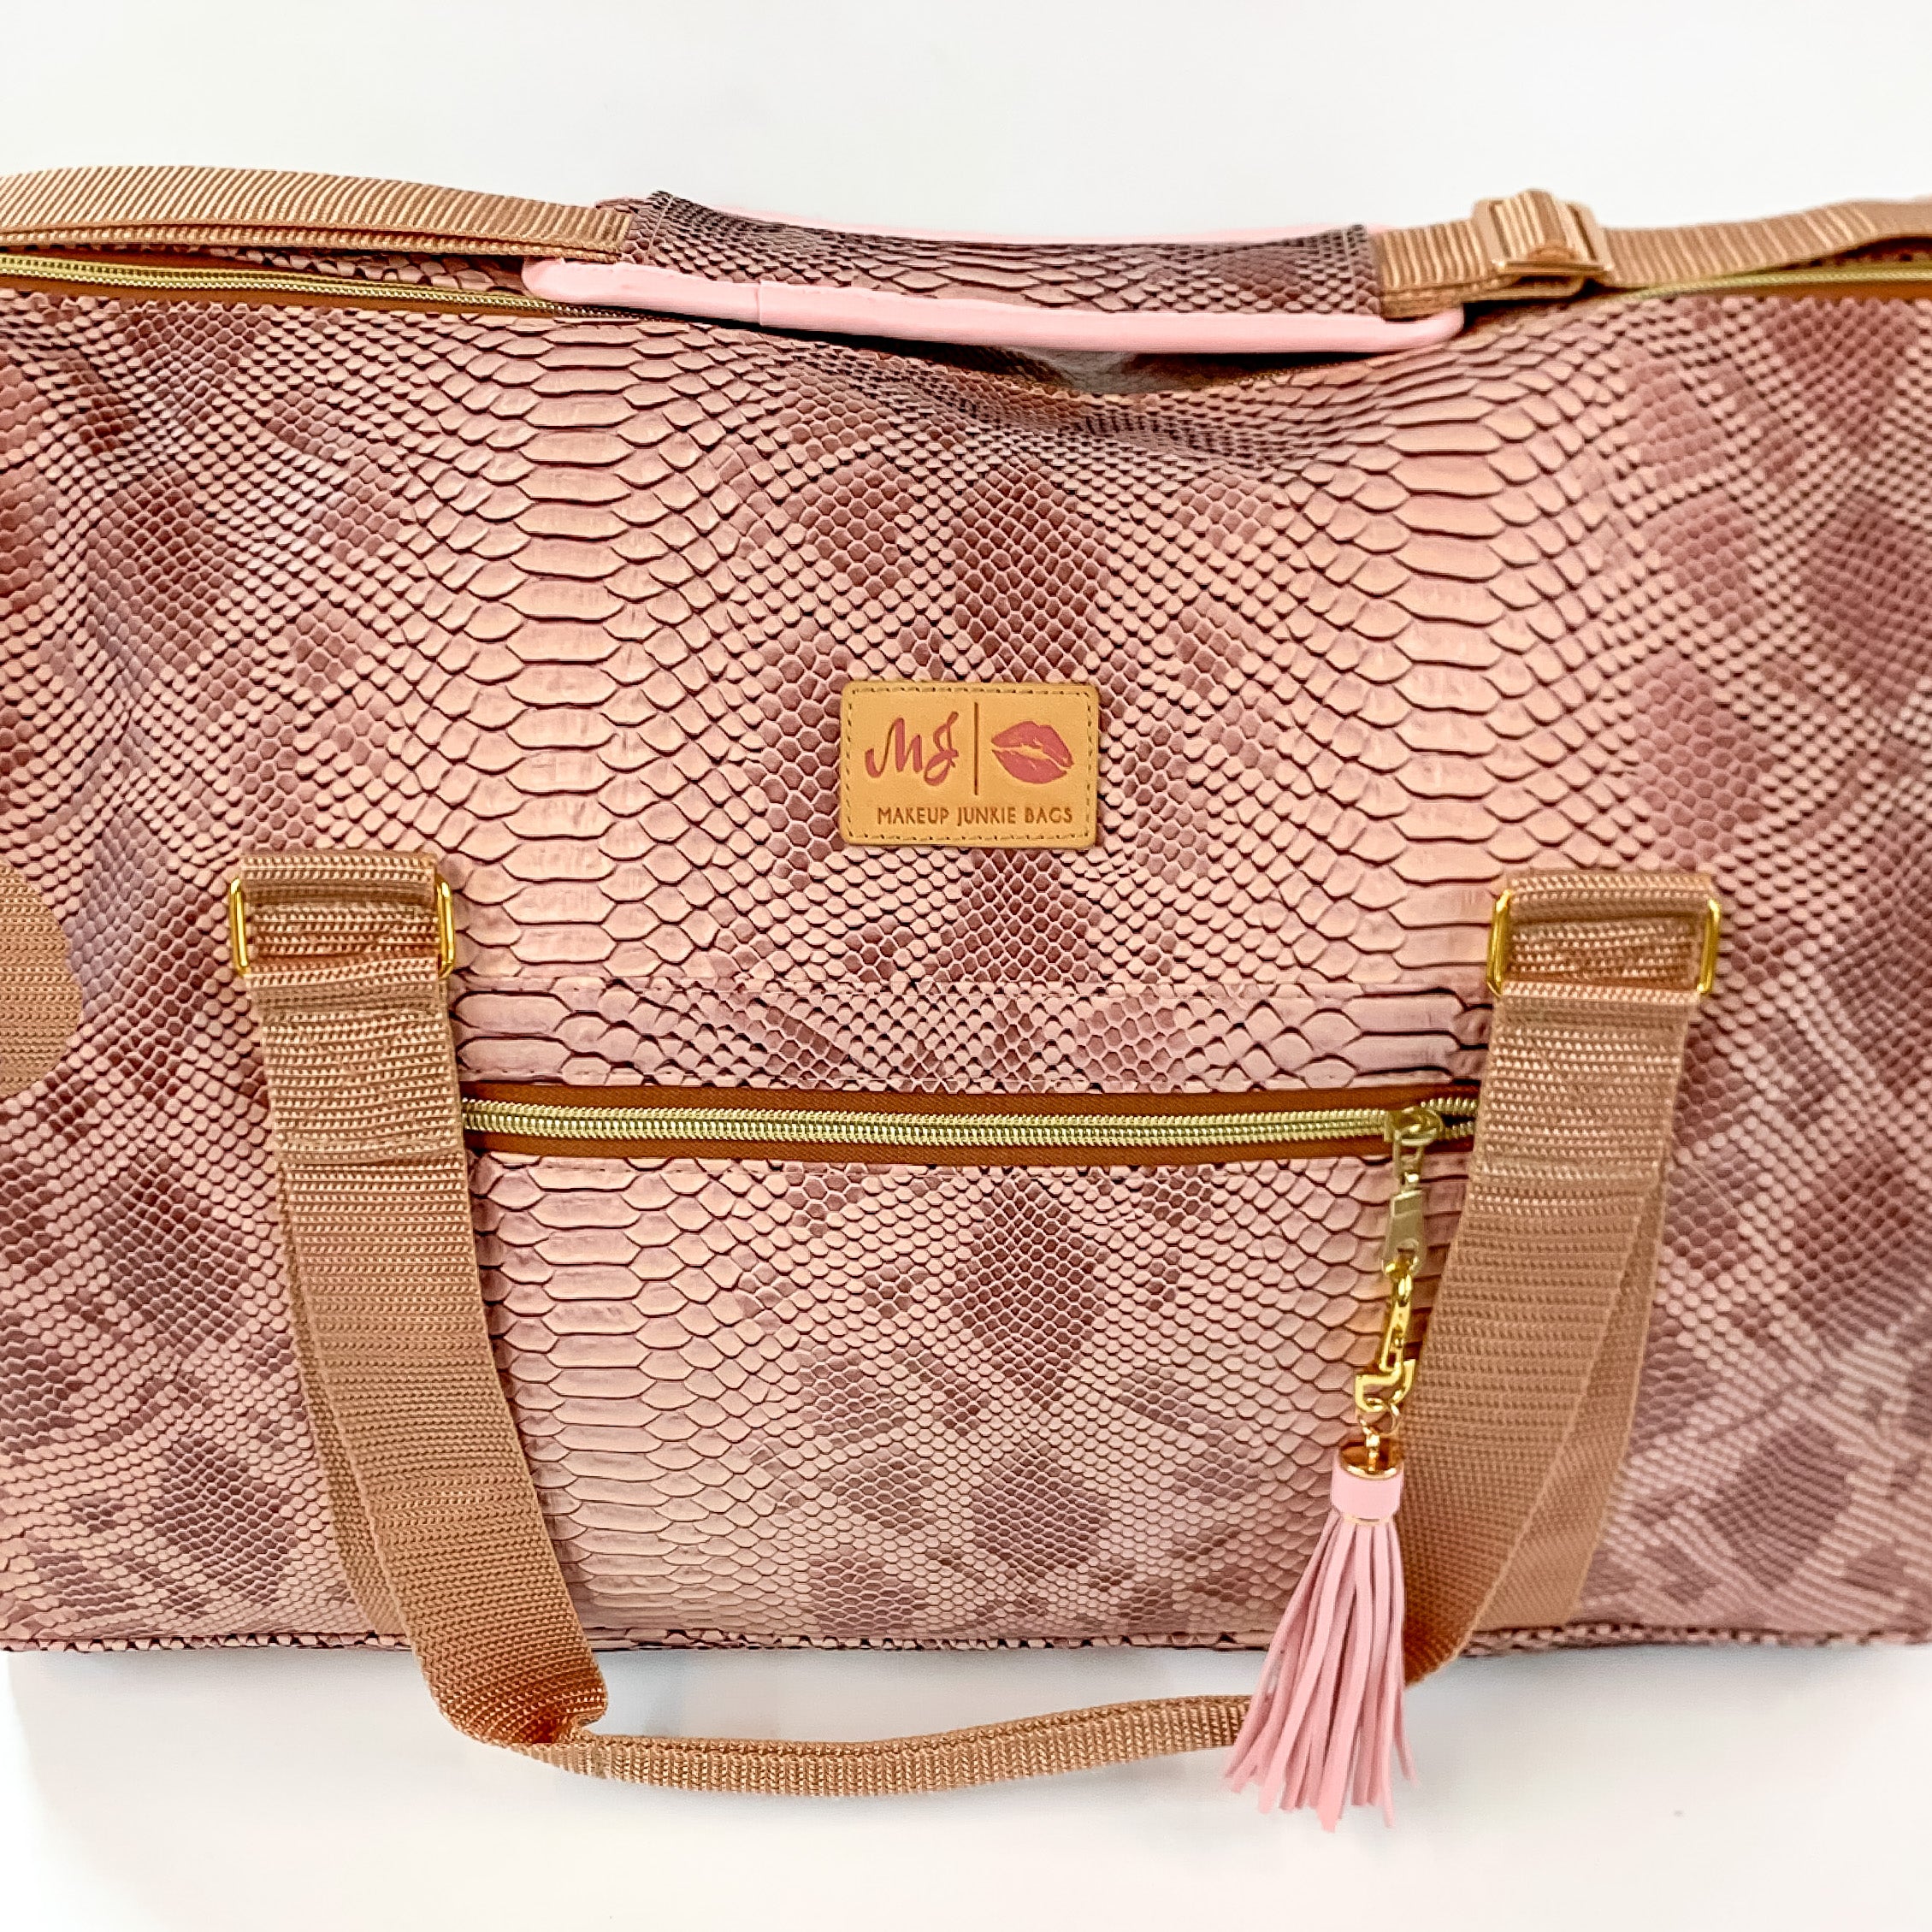 Makeup Junkie | Copperazzi Duffel Bag in Dusty Pink Snake Print - Giddy Up Glamour Boutique